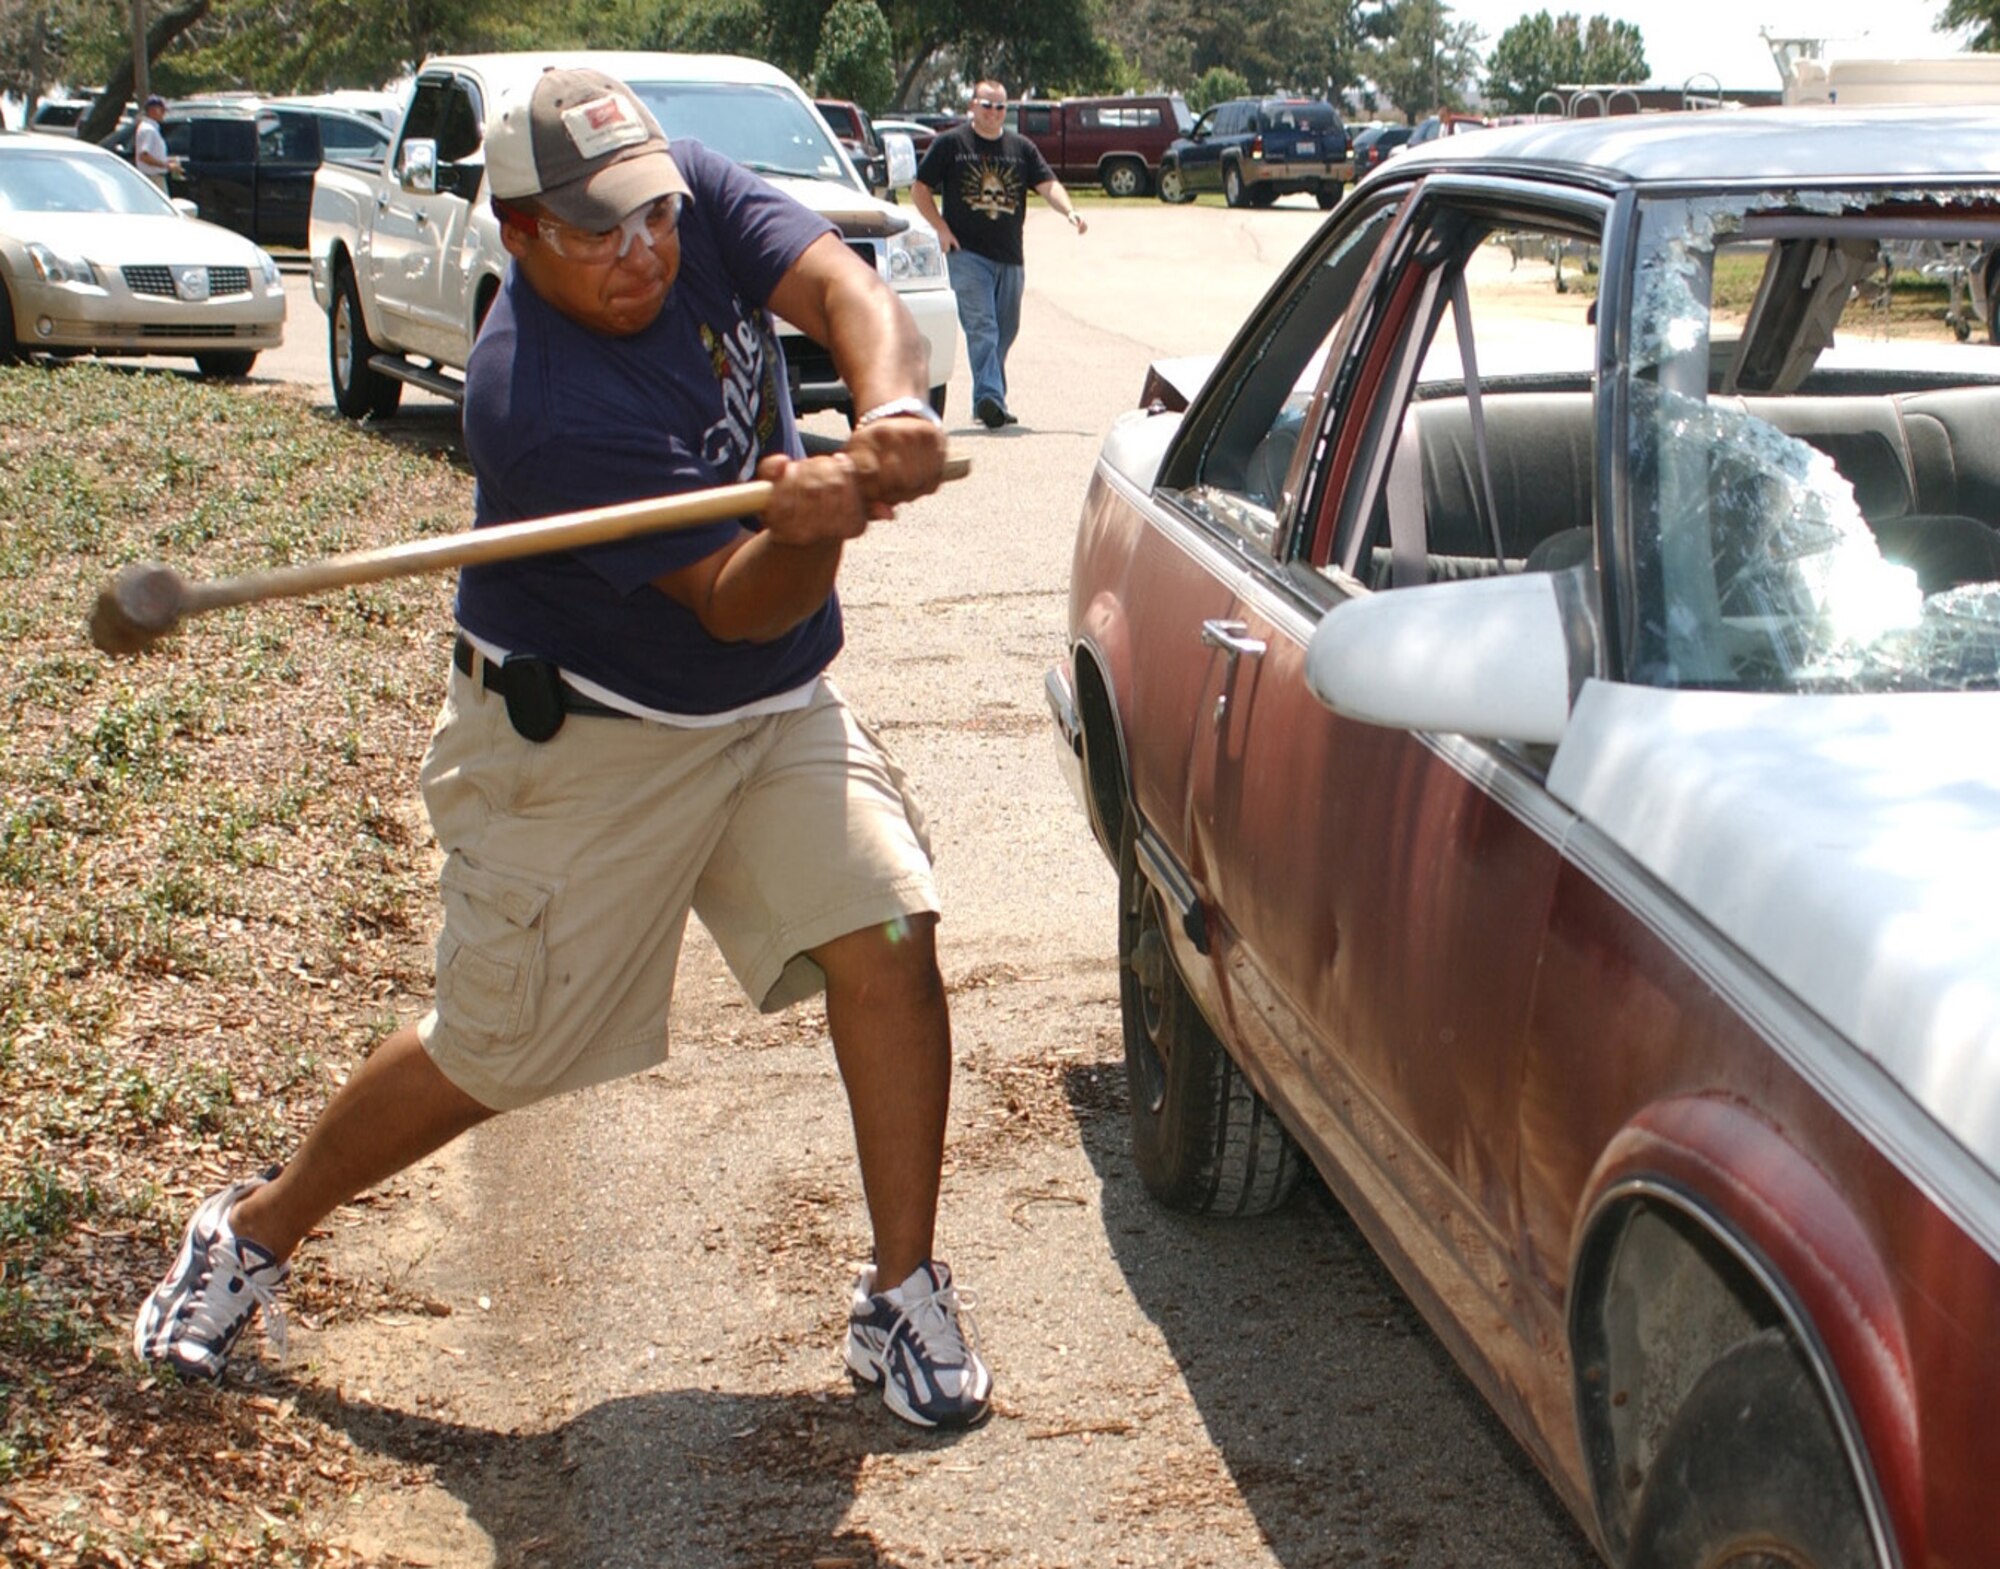 Senior Airman George Olivo, 81st Civil Engineer Squadron, takes a whack at a wrecked car, a stress-relief device at the picnic.  (U.S. Air Force photo by Kemberly Groue)